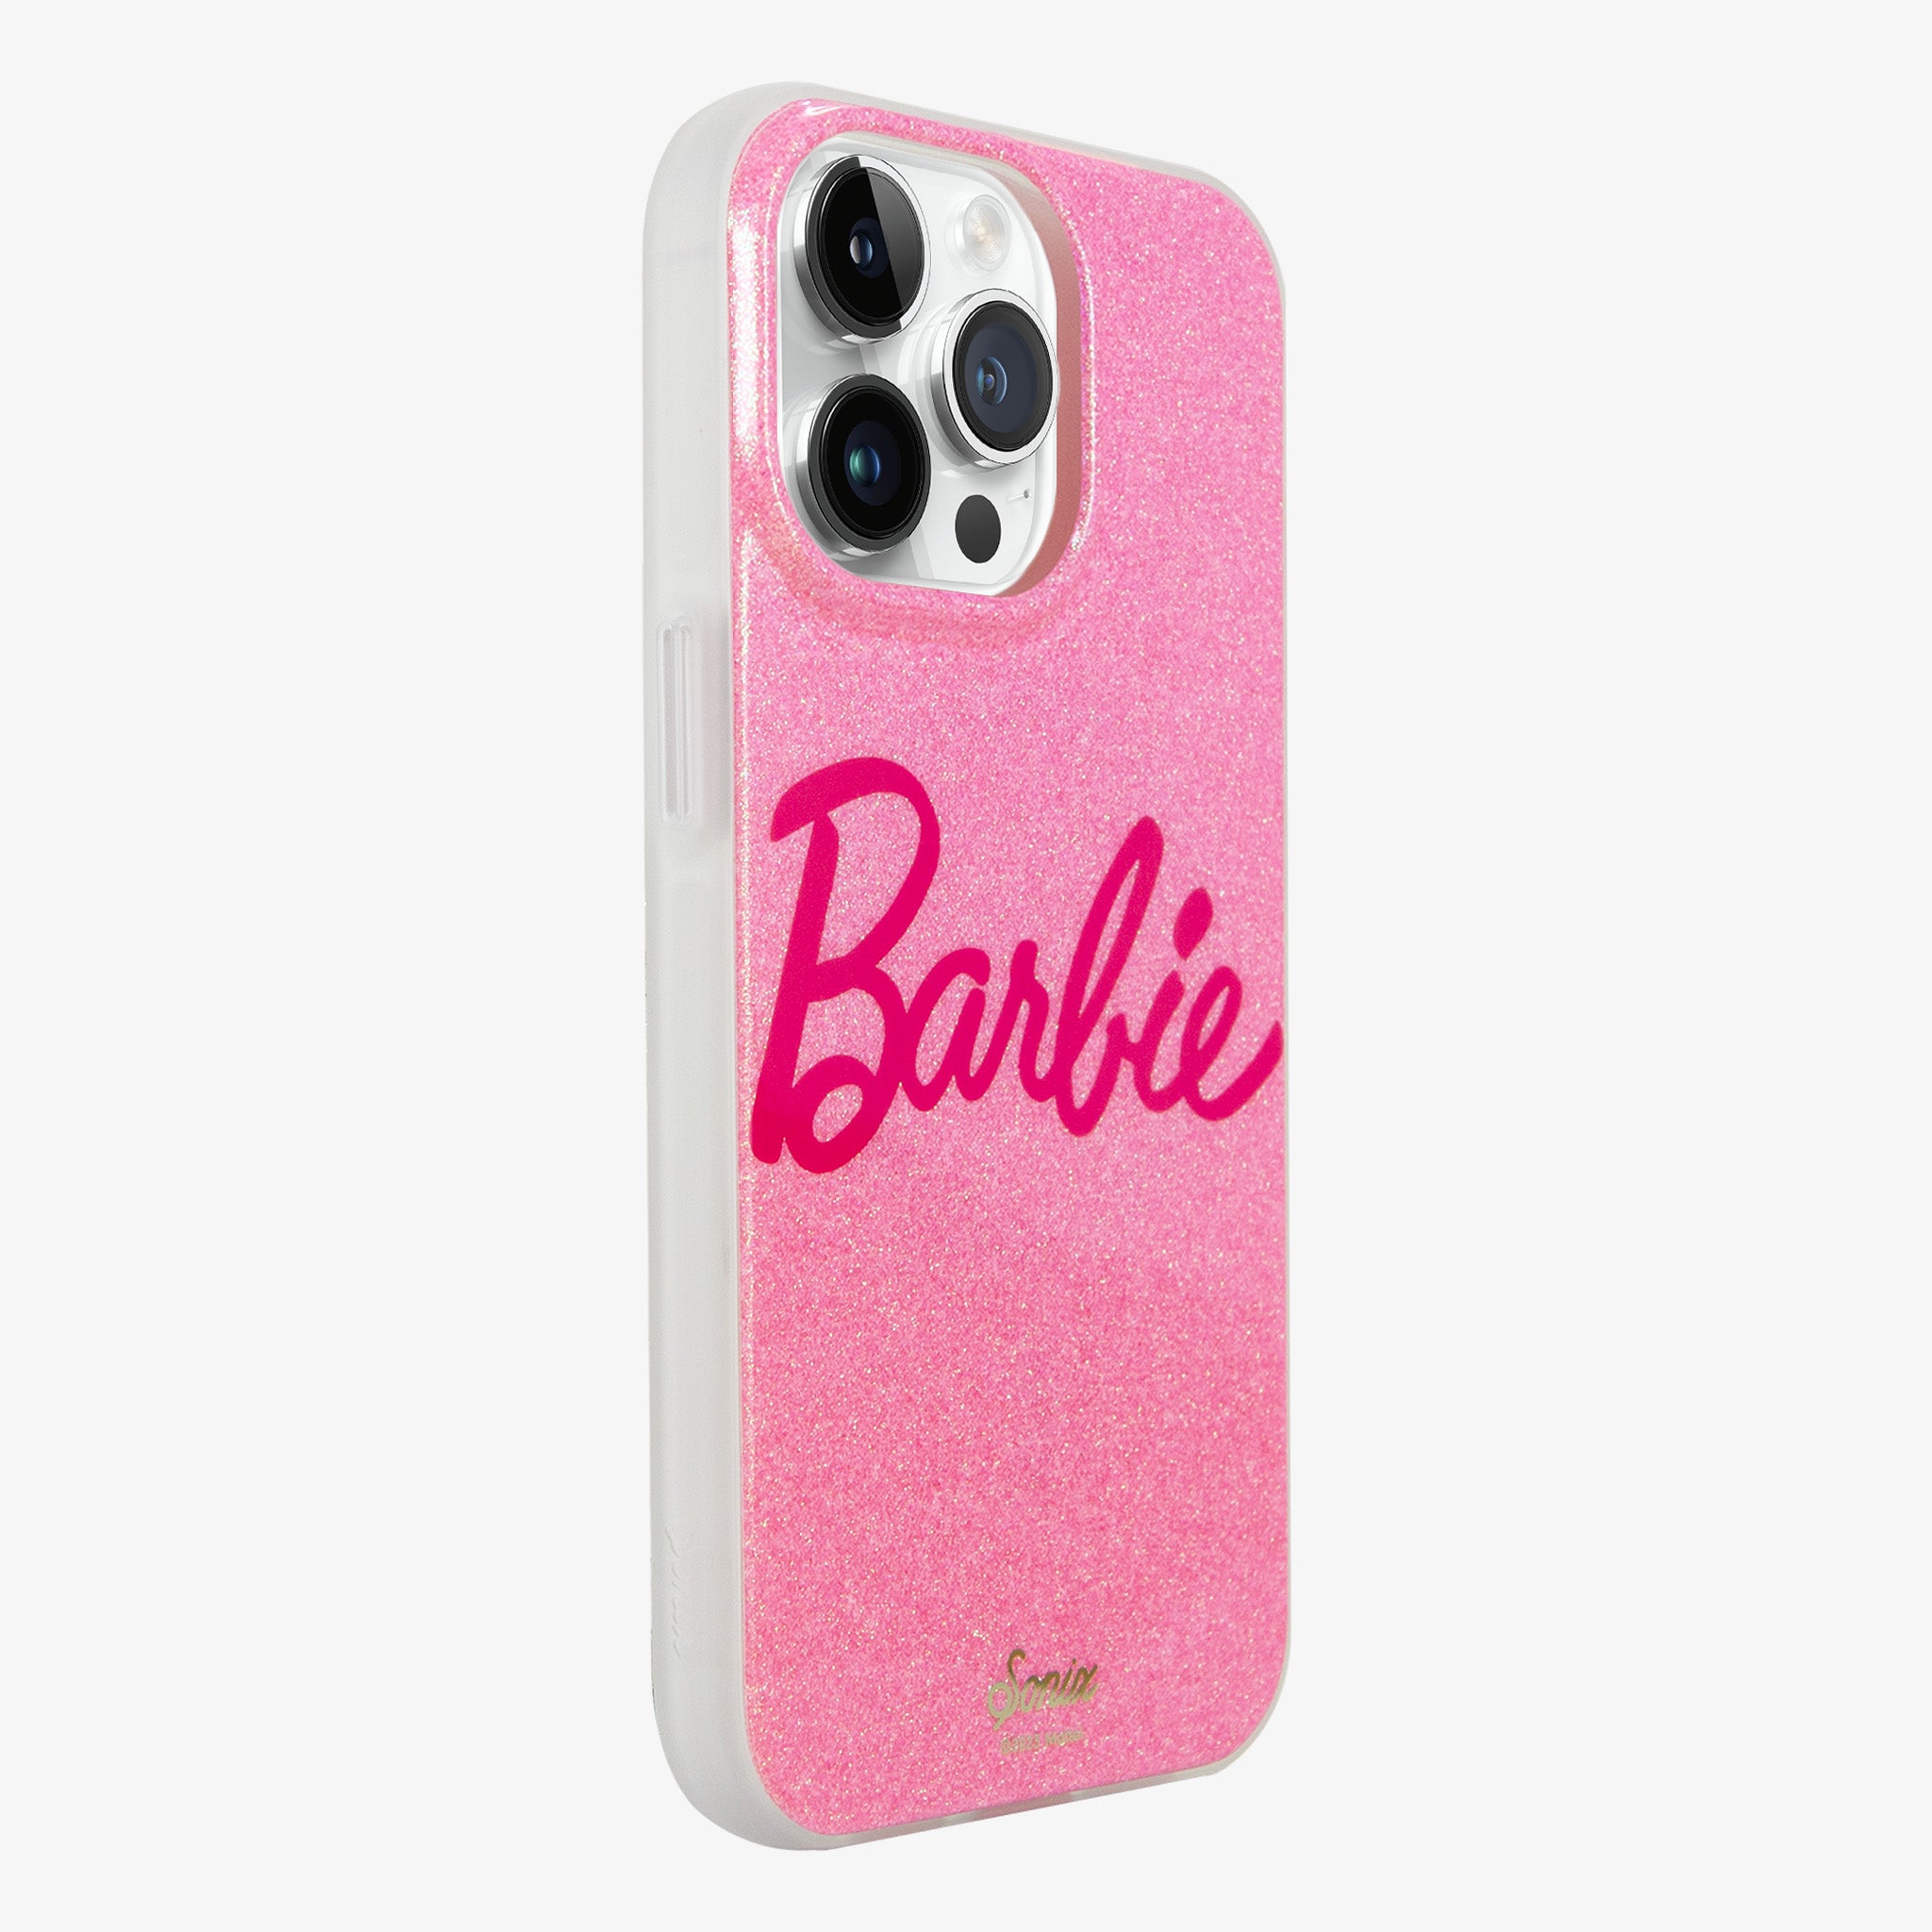 Iconic Barbie™ Pink MagSafe® Compatible iPhone Case